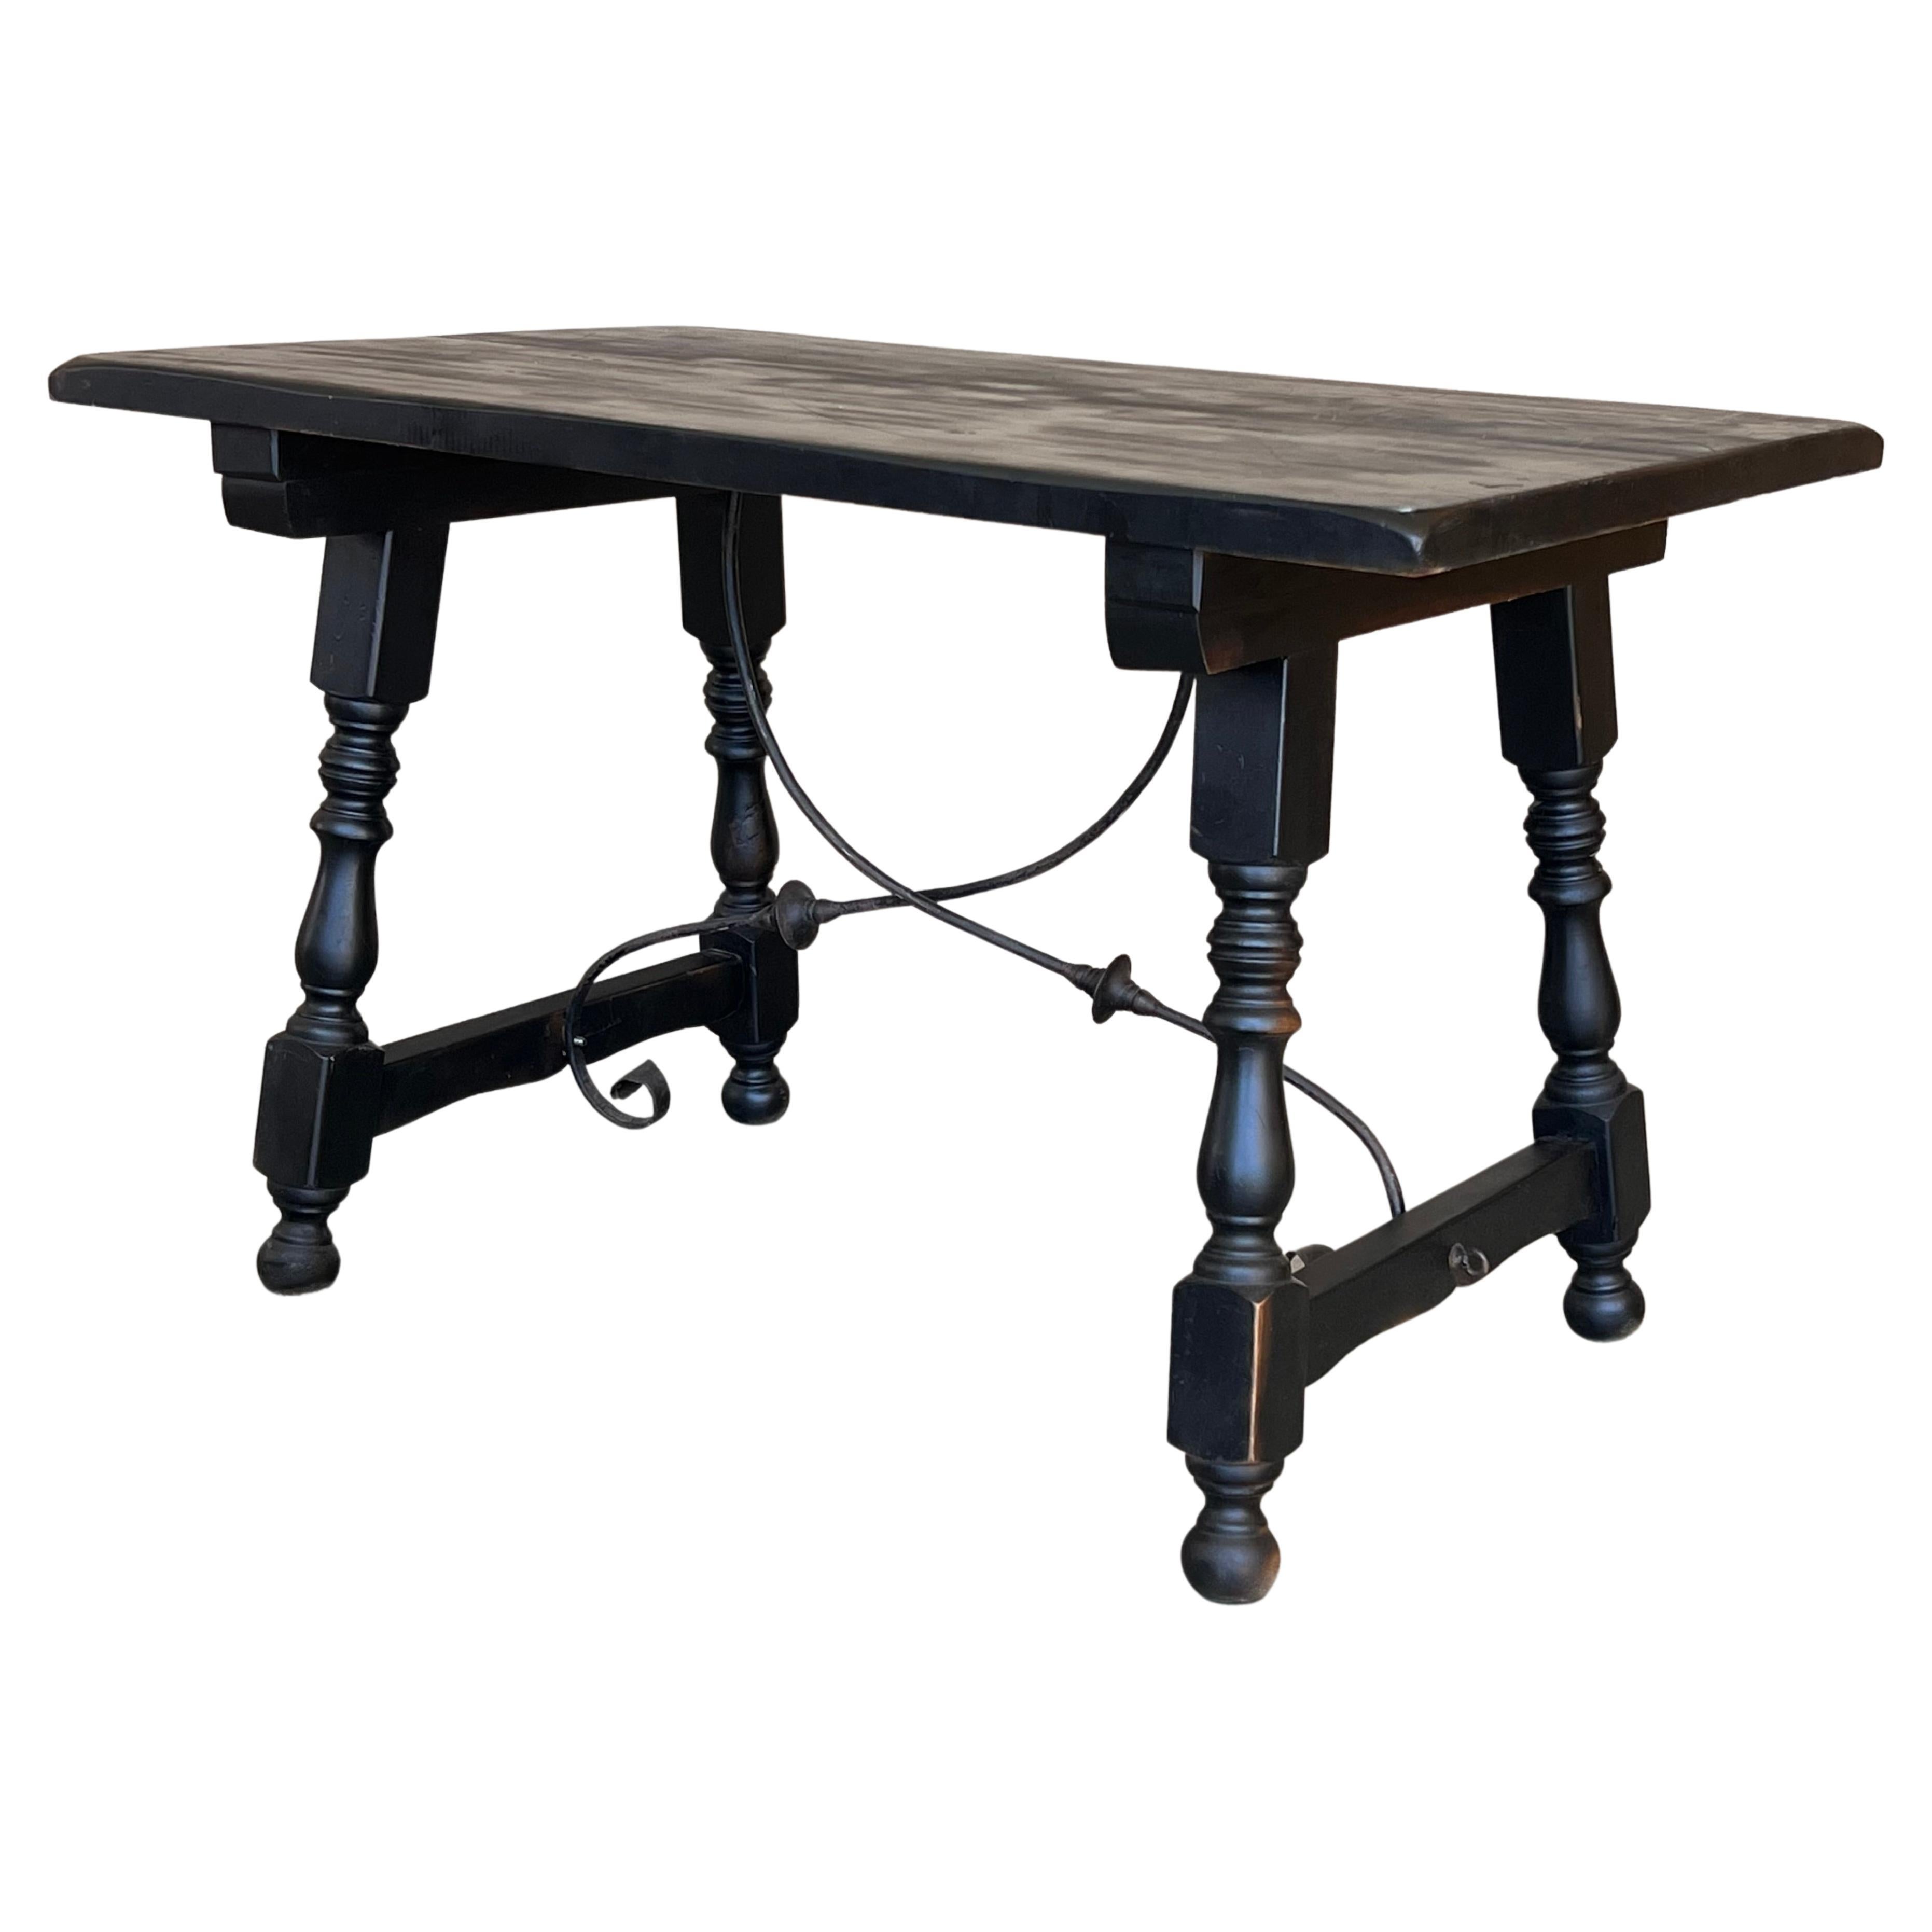 Late 19th Spanish Walnut Dining or Desk Fratino Table with Iron Stretcher